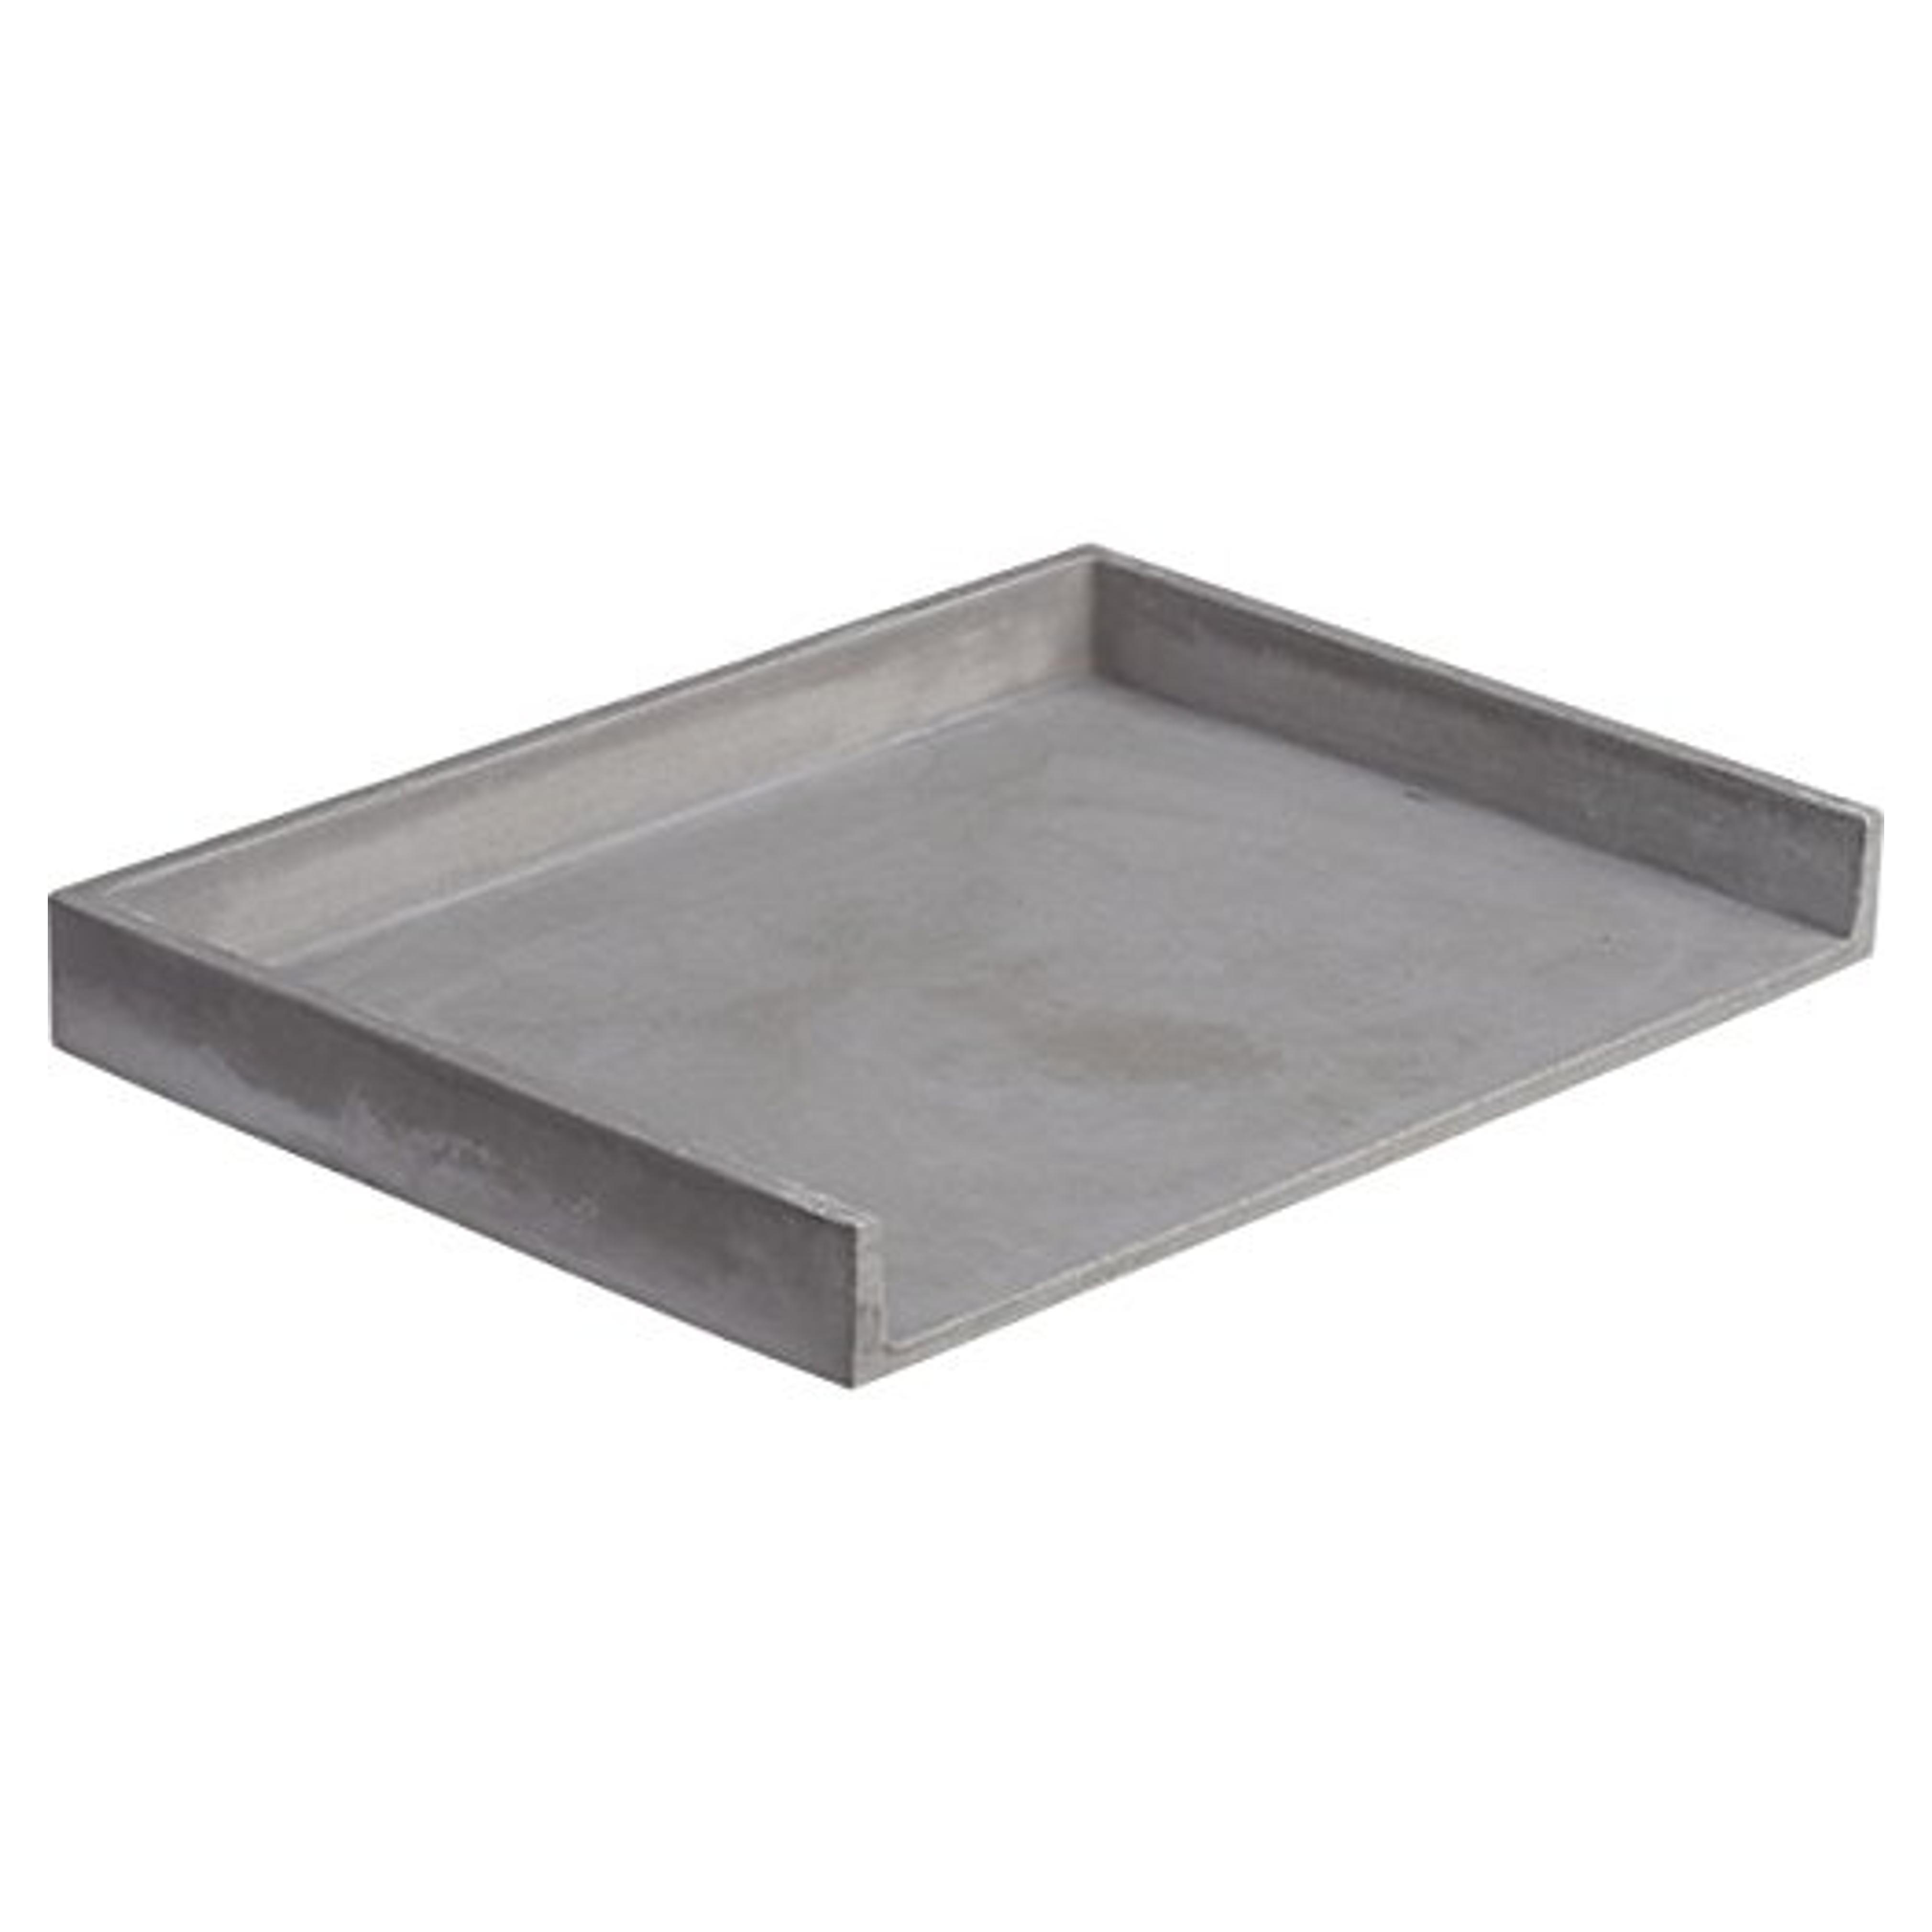 Cement Letter Tray